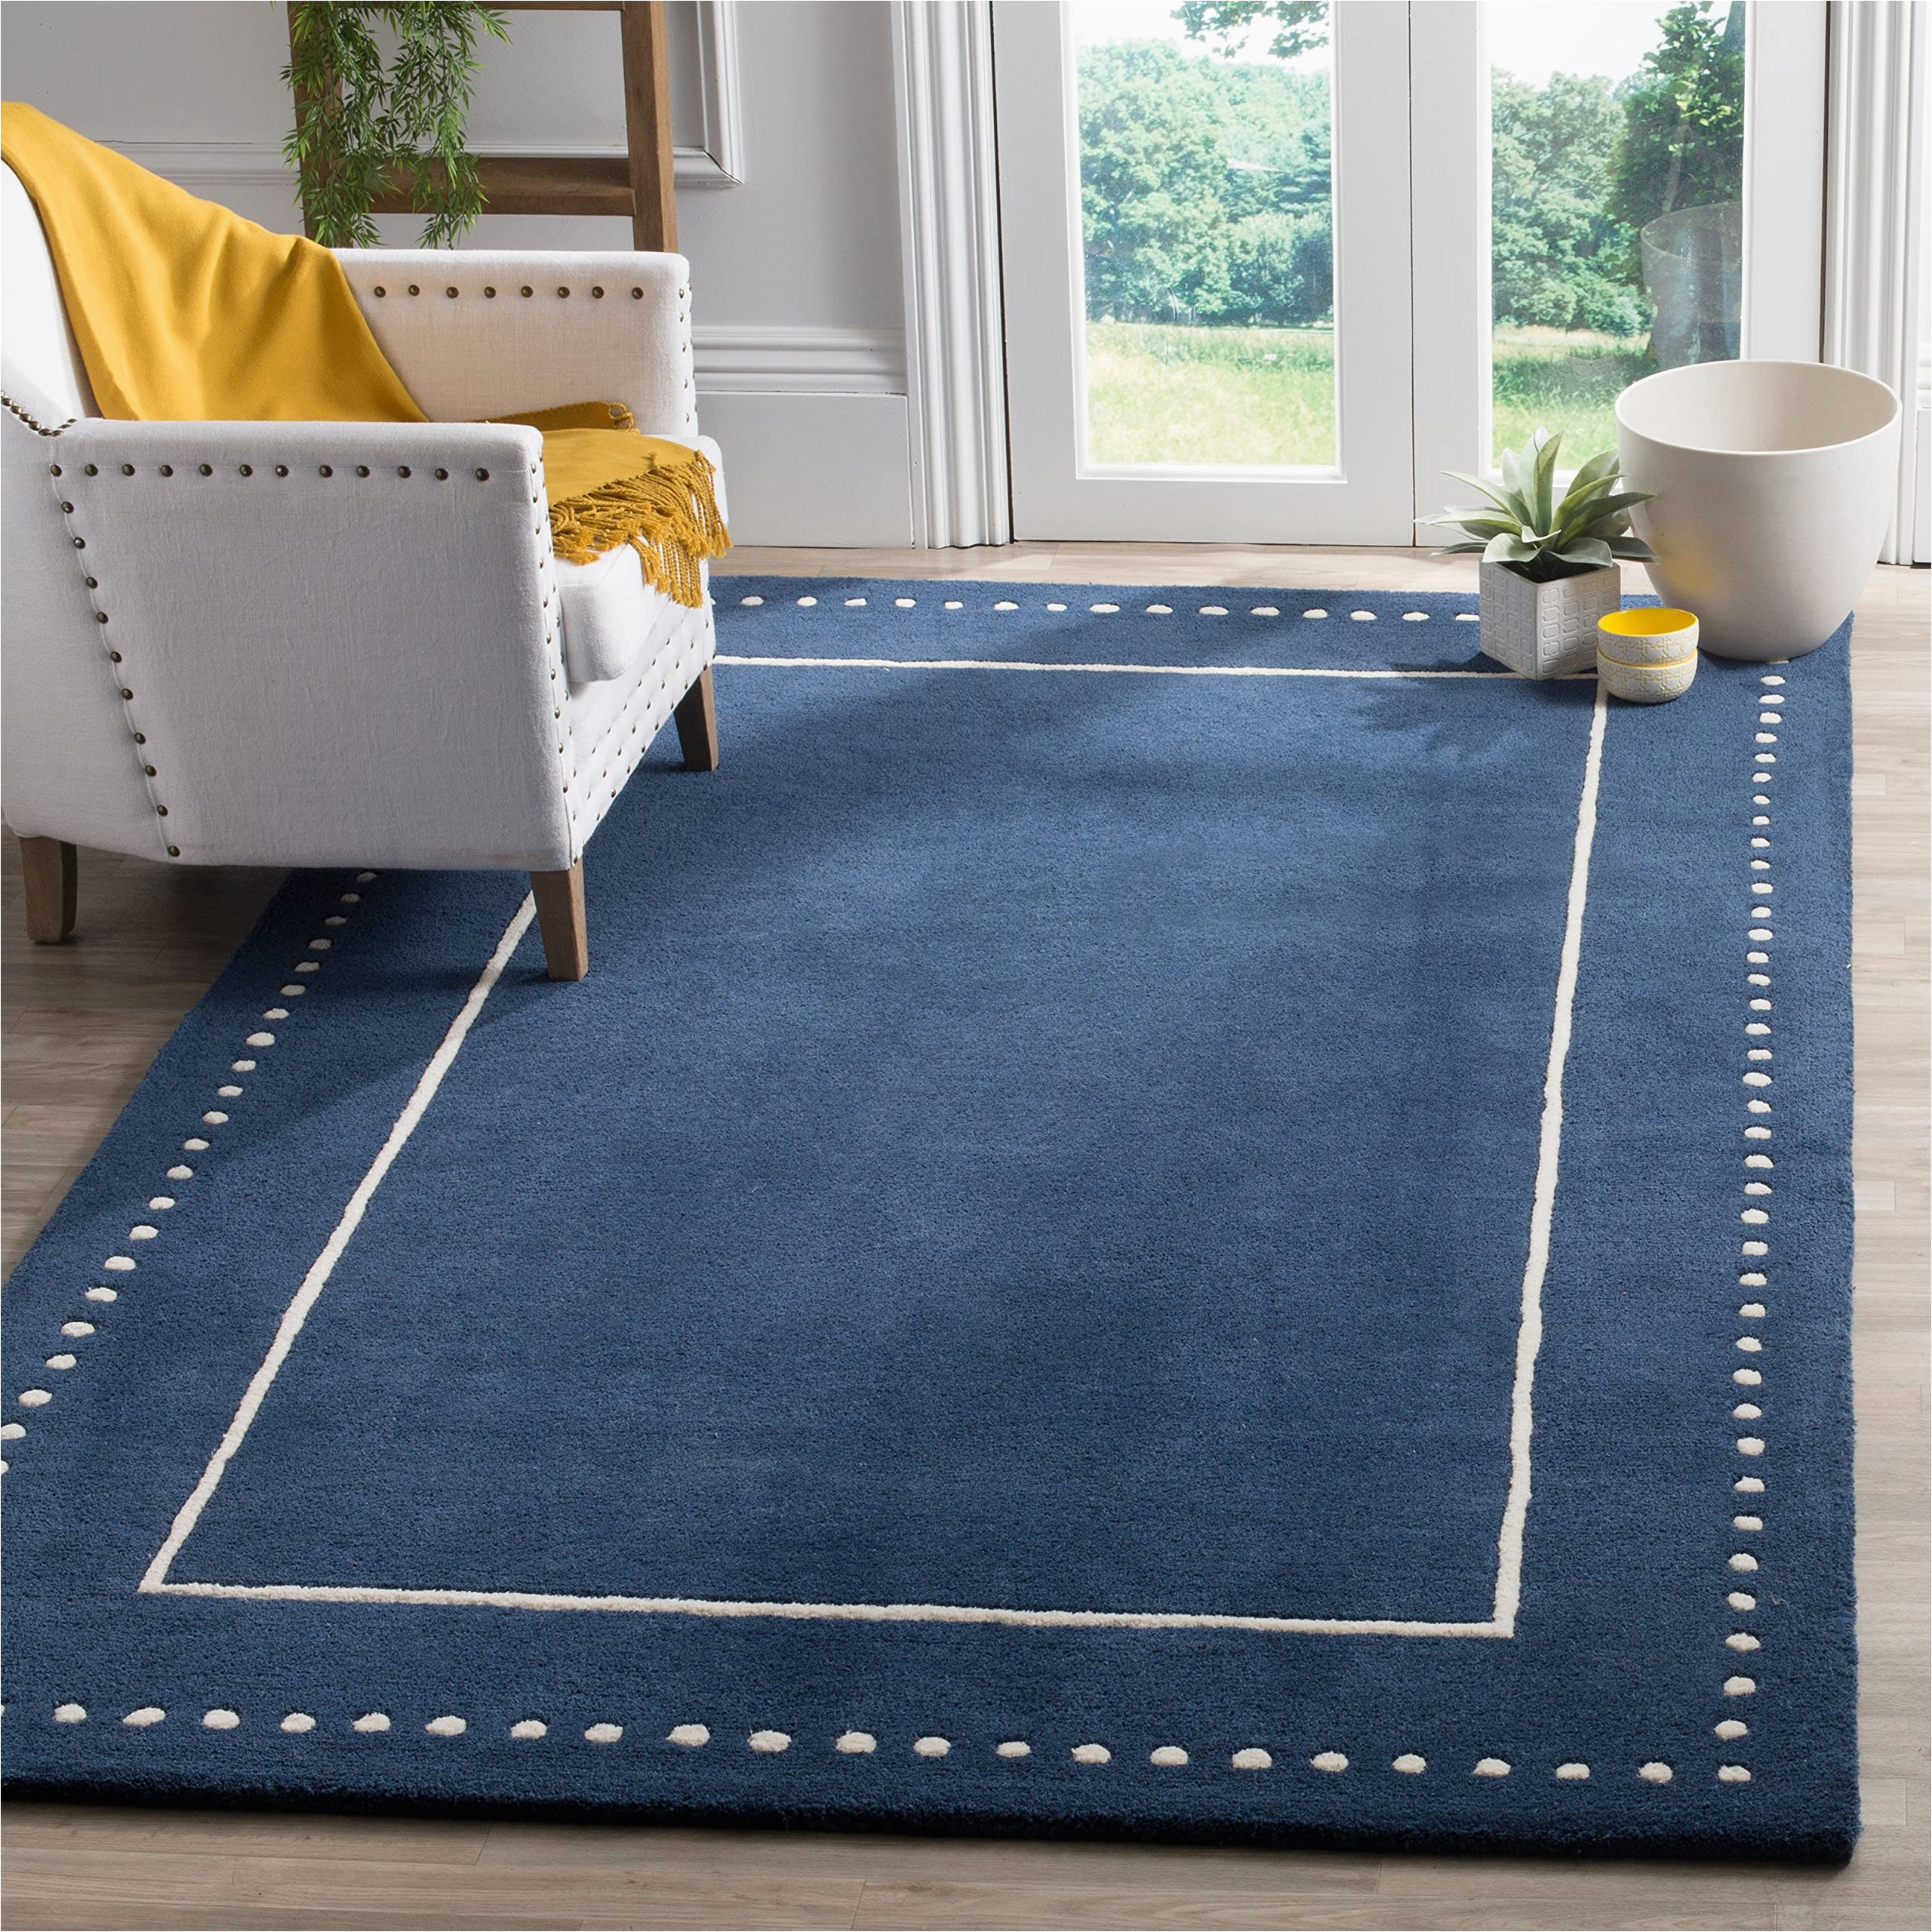 Navy Blue and Ivory area Rug Safavieh Bella Collection 8′ X 10′ Navy Blue/ivory Bel151g Handmade Dotted Border Premium Wool area Rug